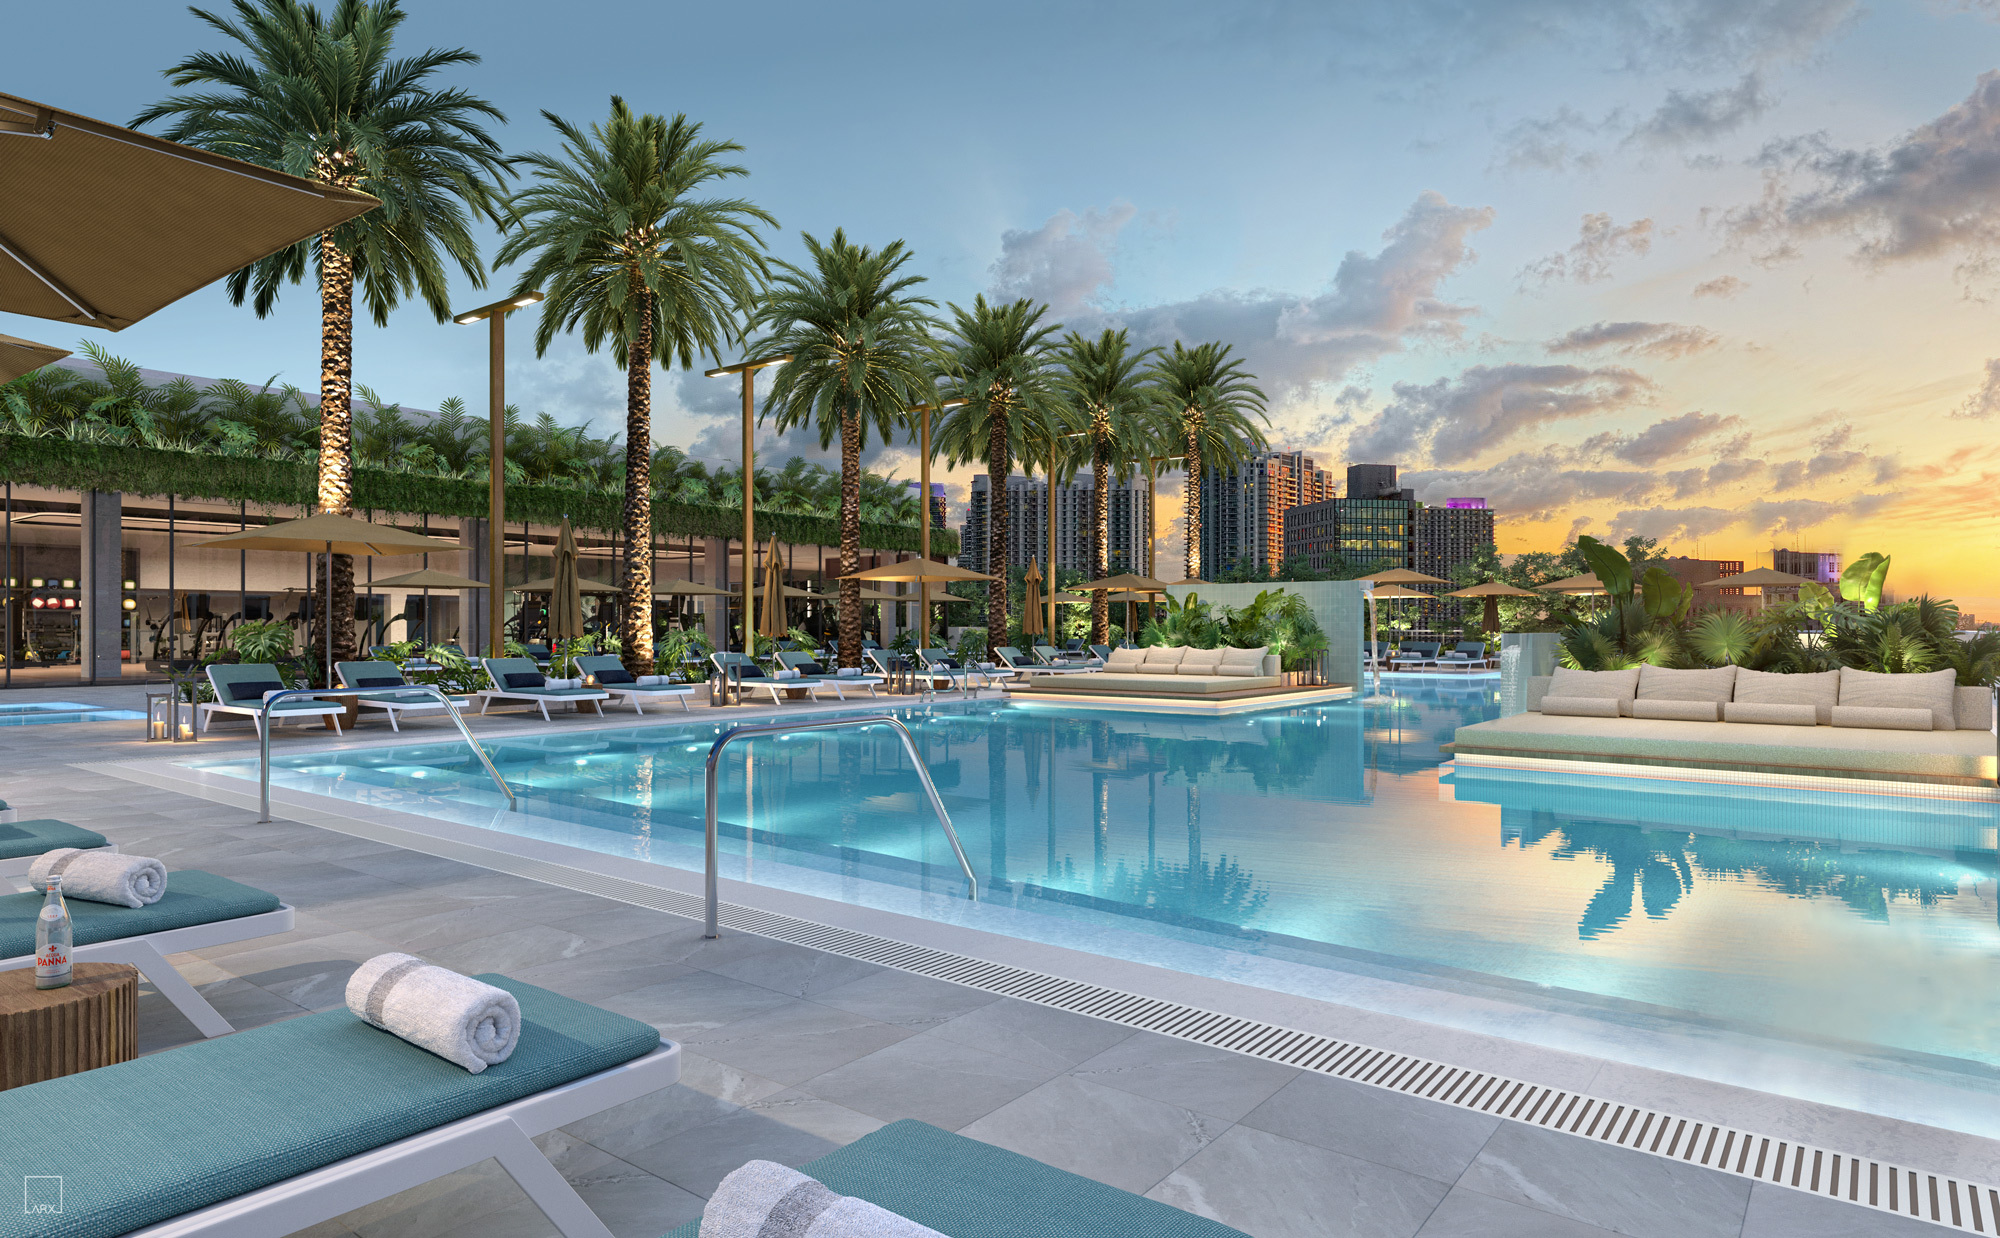 Outdoor pool at Forma Miami luxury residences. Large outdoor pool with views of downtown Miami at dusk.